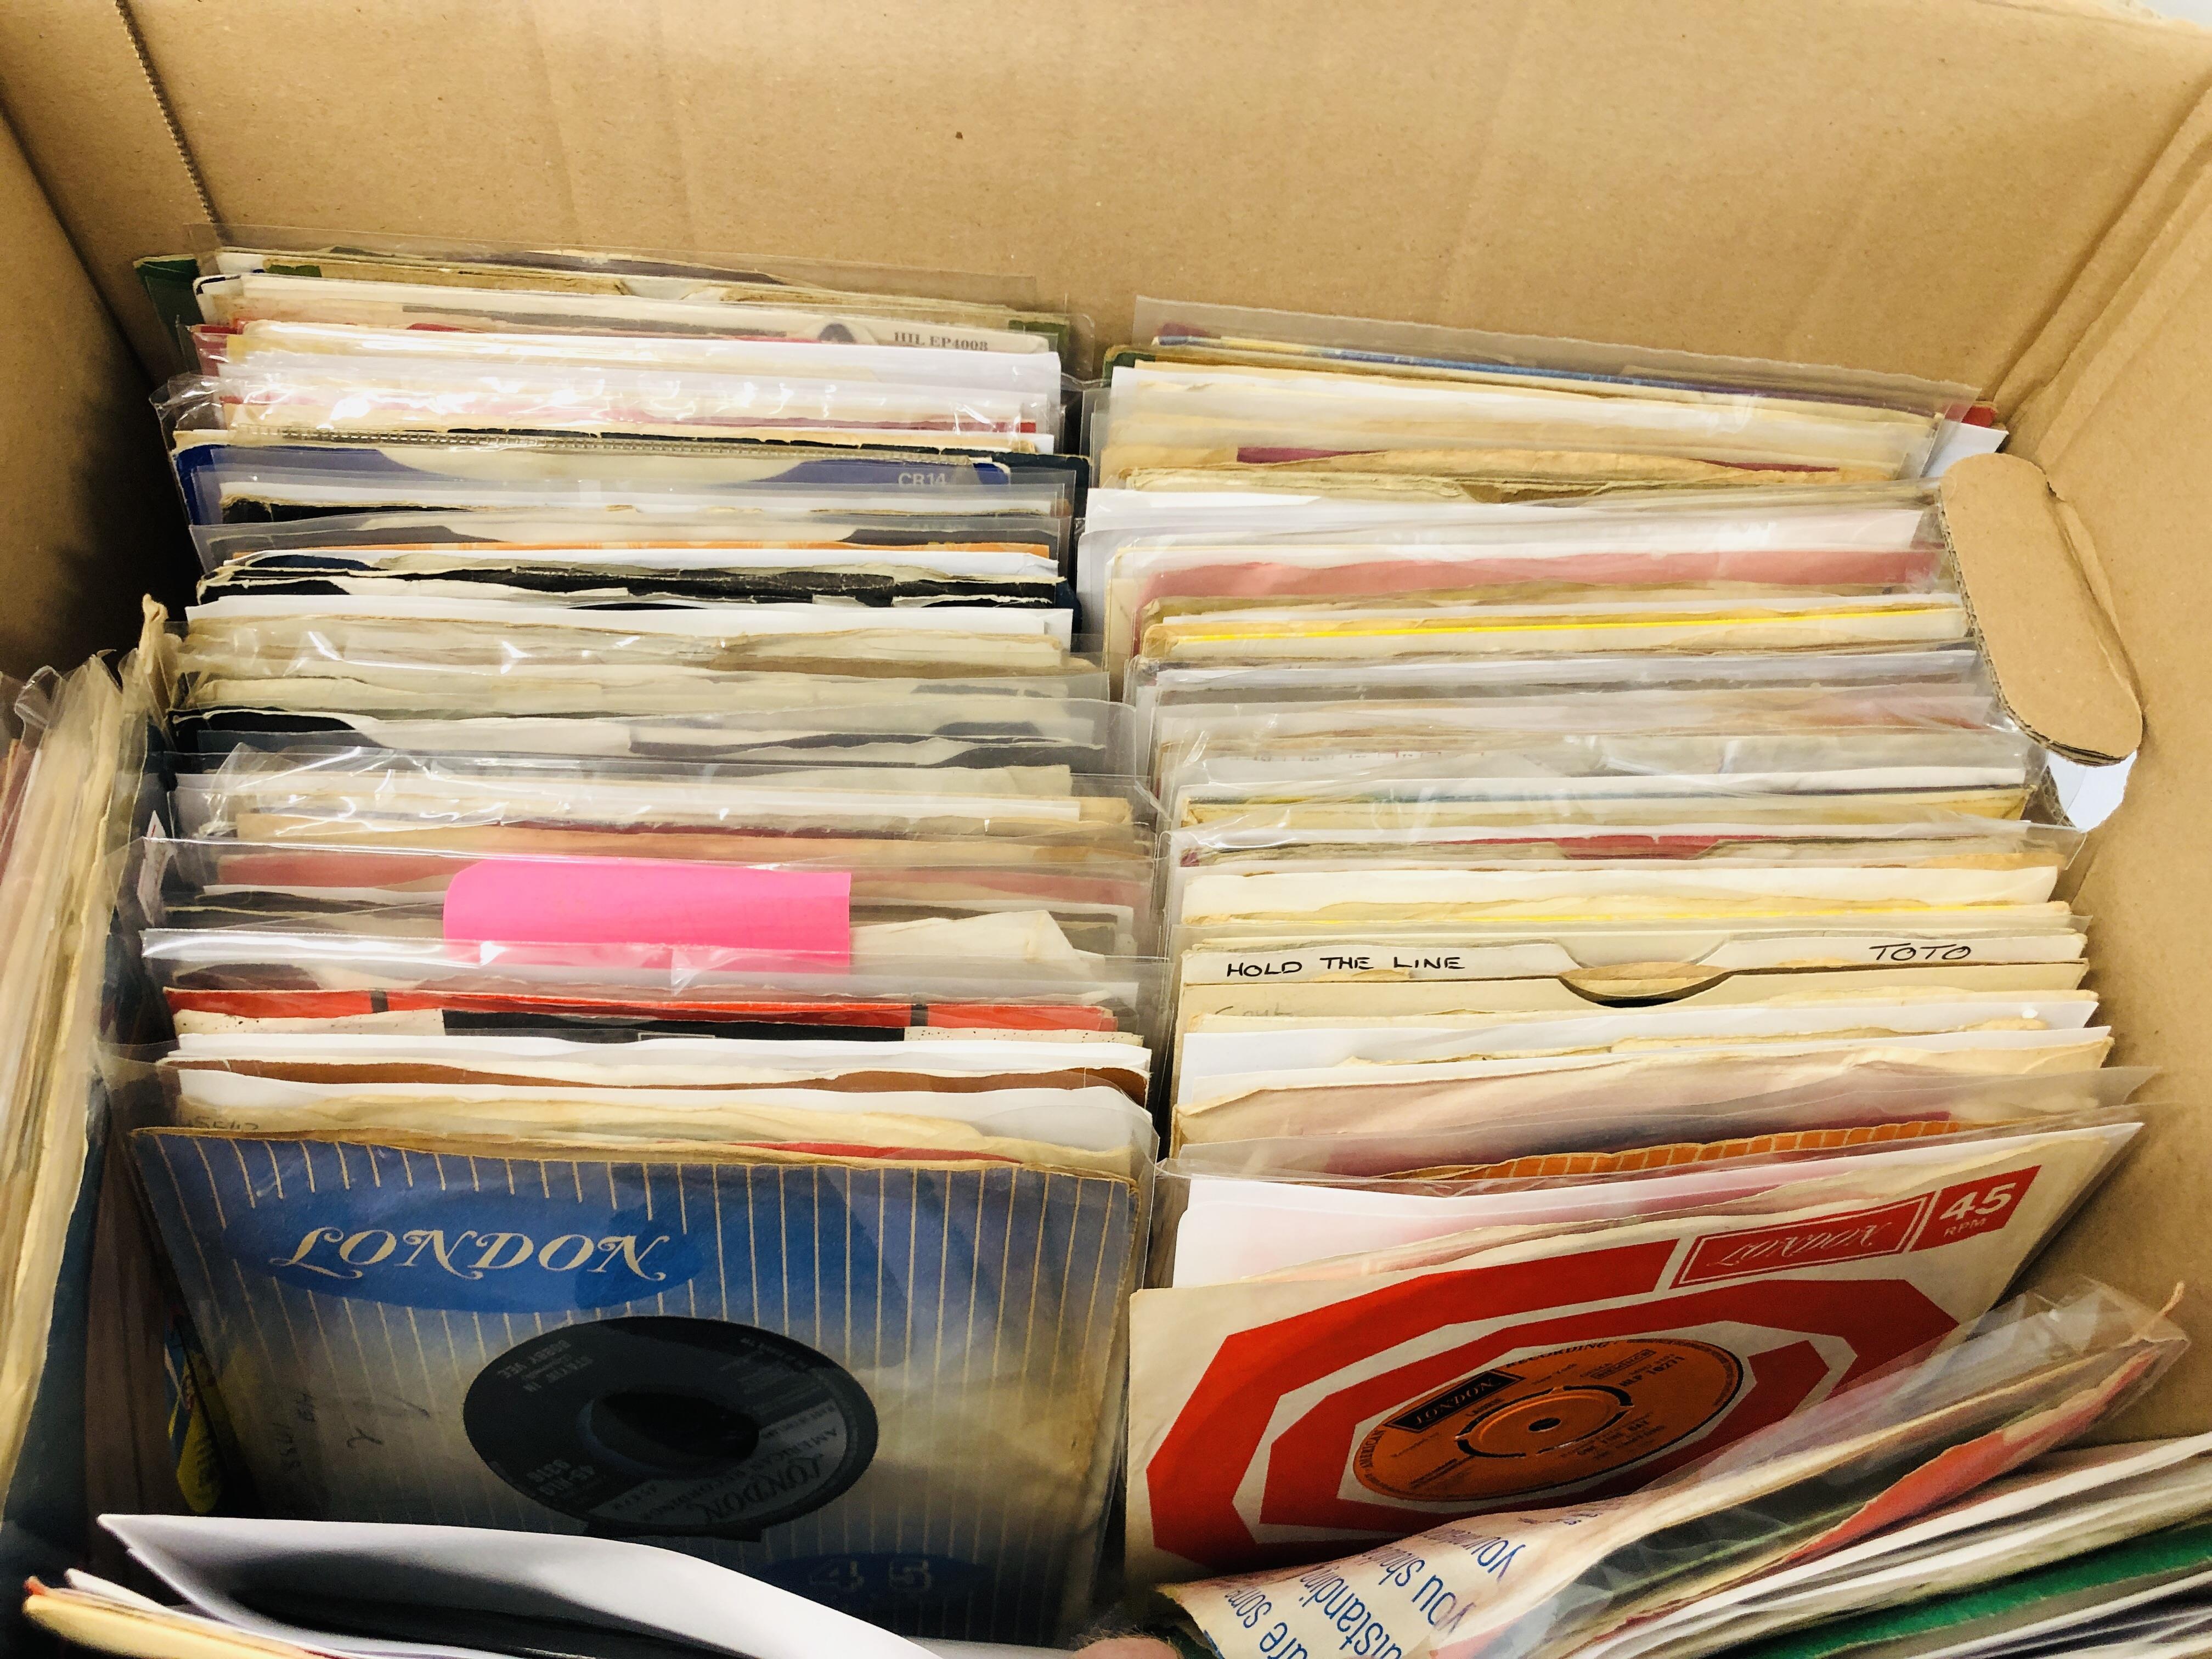 2 BOXES CONTAINING A QUANTITY OF 45 RPM SINGLES TO INCLUDE INXS, CATHERINE WHEEL, PHIL COLLINS, - Image 9 of 10